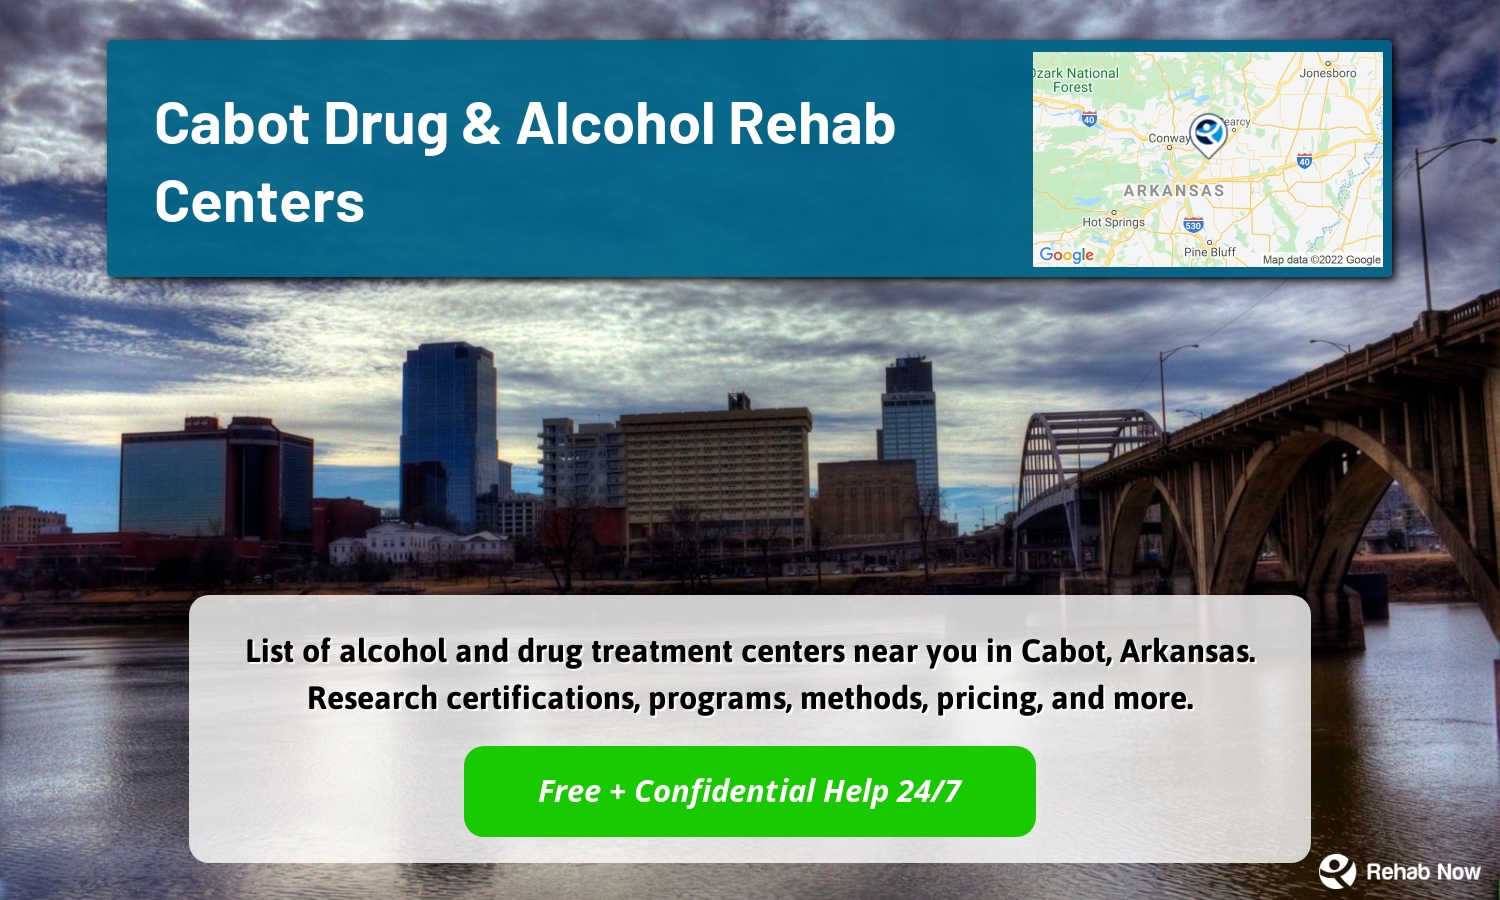 List of alcohol and drug treatment centers near you in Cabot, Arkansas. Research certifications, programs, methods, pricing, and more.